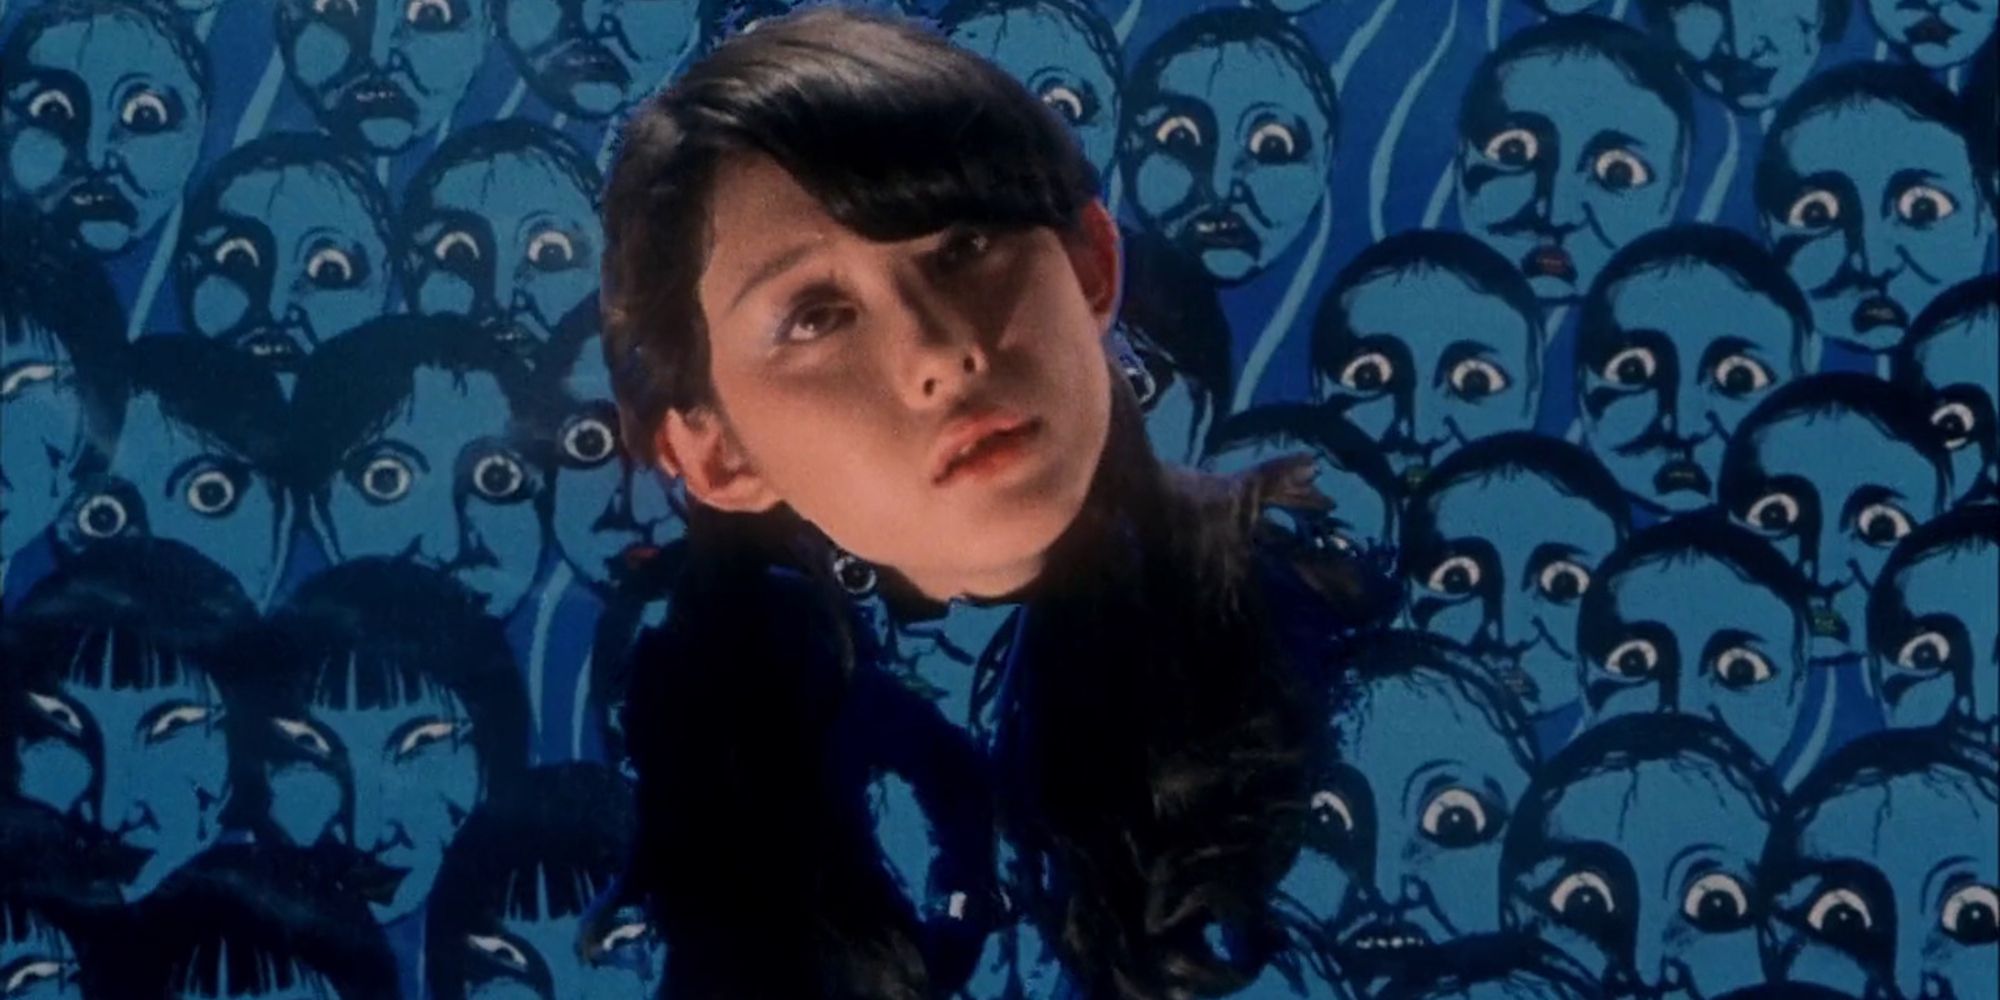 Disembodied head of young girl floating against a sea of blue-tinted faces